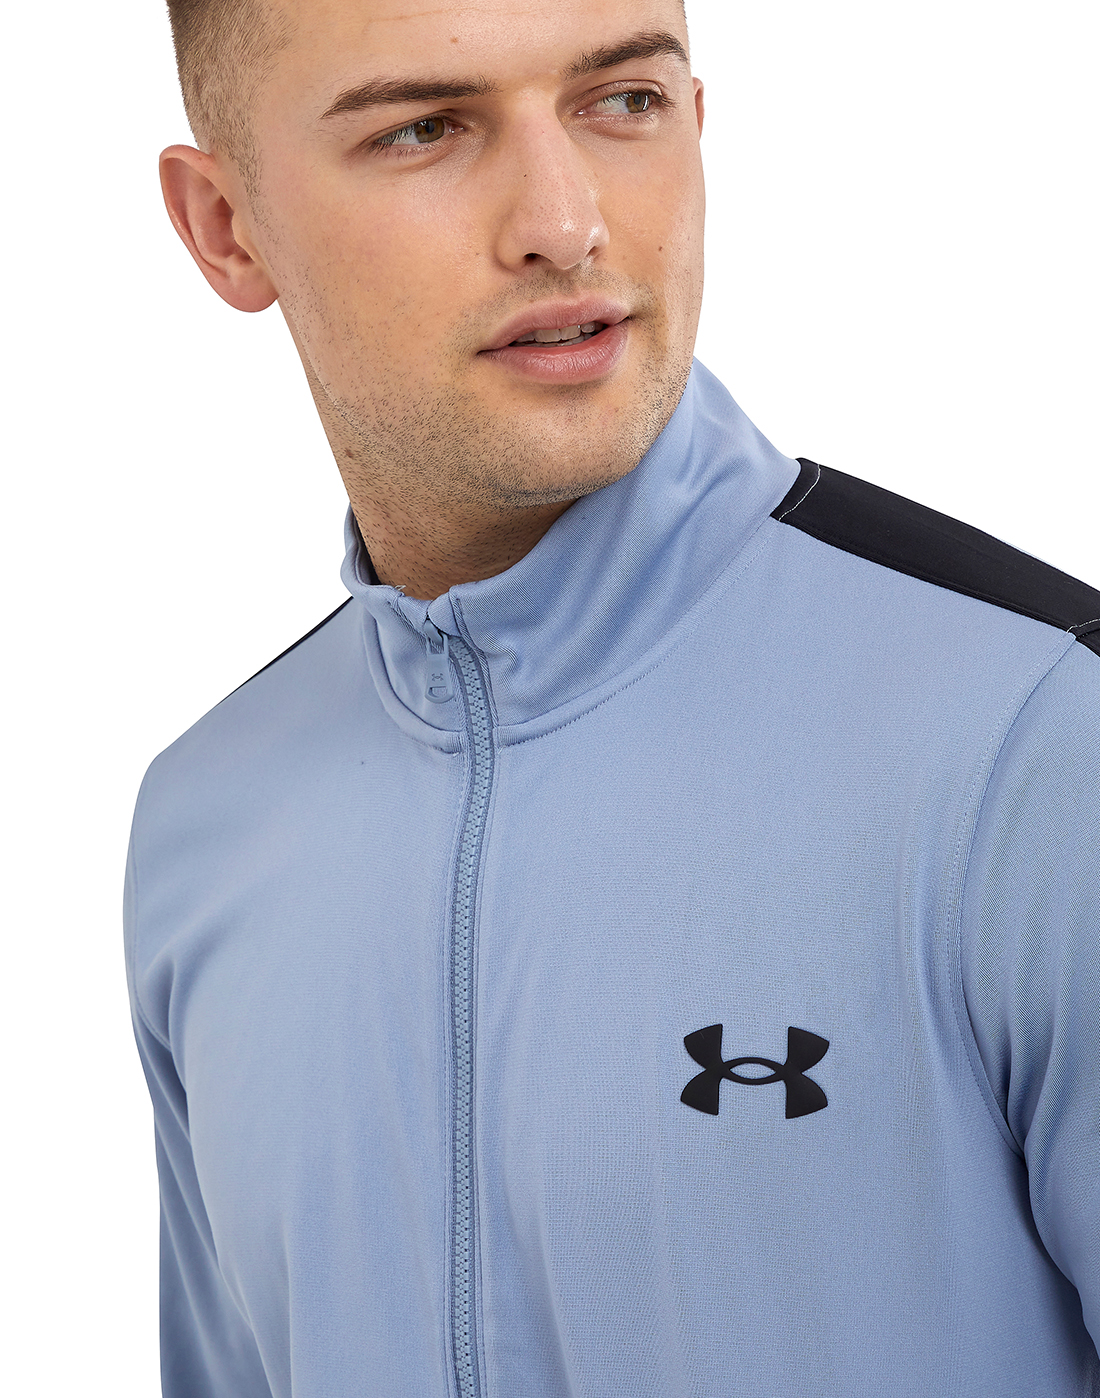 Under Armour Mens Knit TrackSuit - Blue | Life Style Sports IE